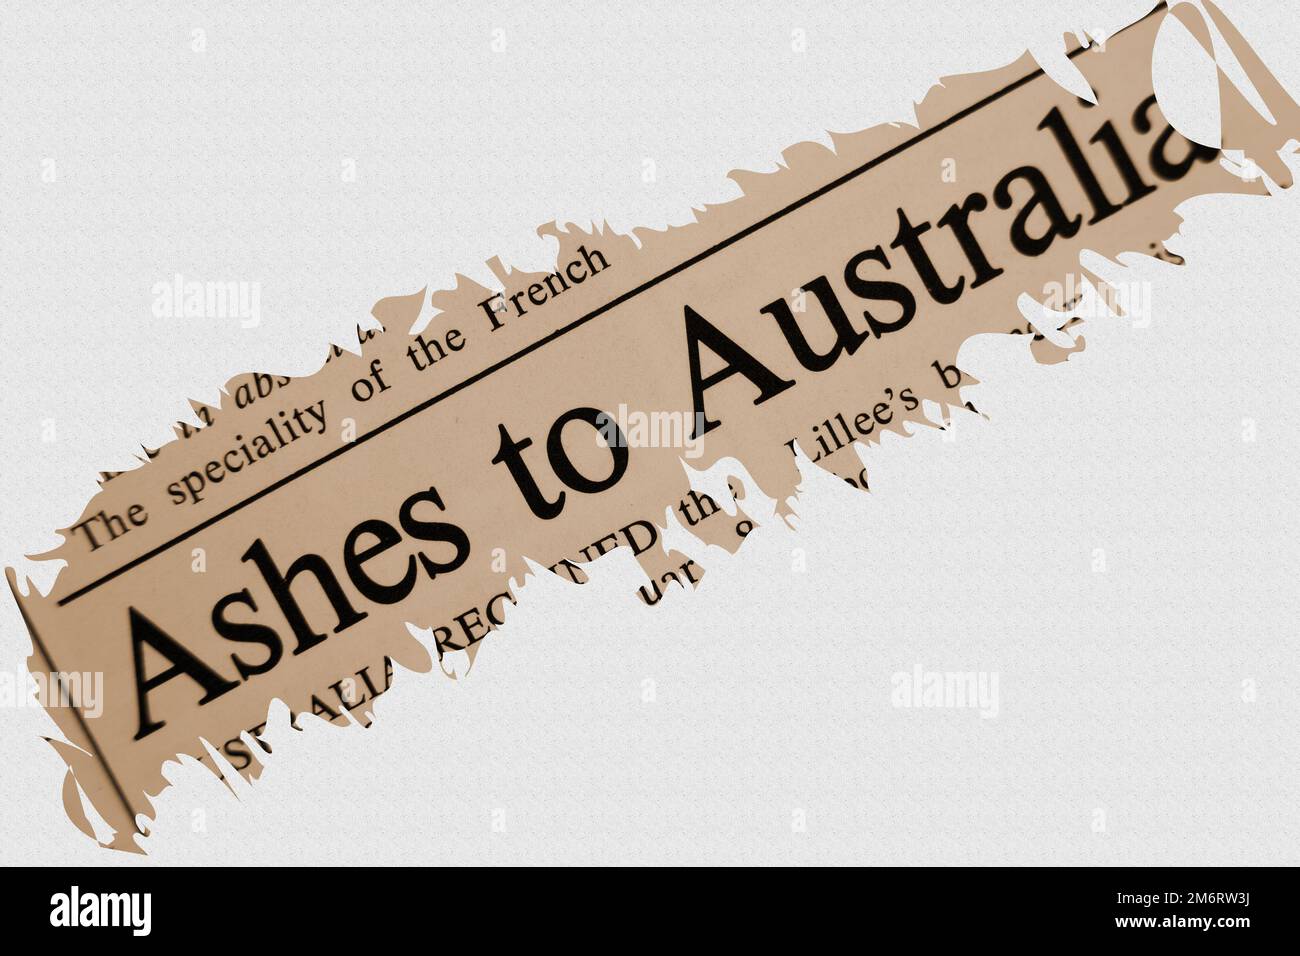 news story from 1975 newspaper headline article title - Ashes to Australia - sepia overlay Stock Photo